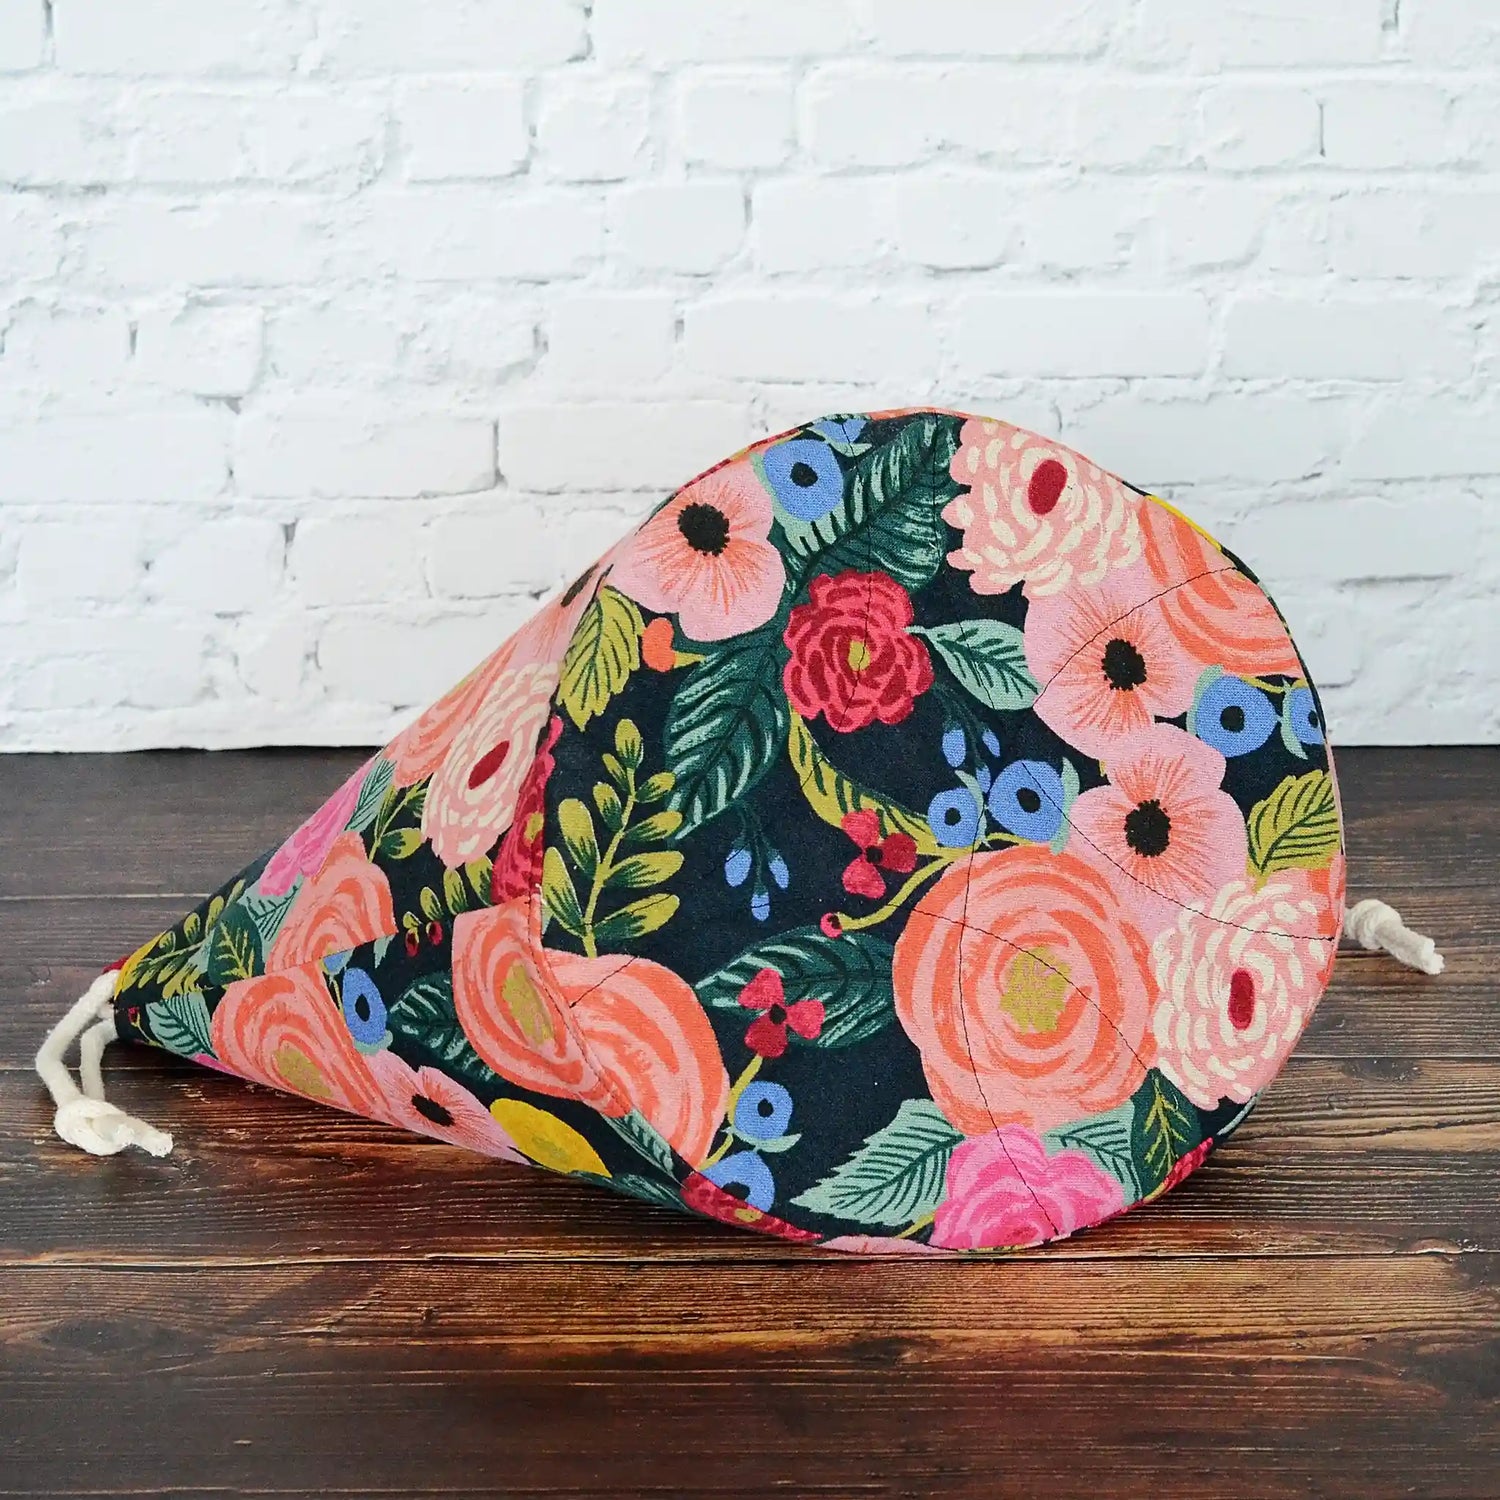 Stunning floral project bag in English Garden canvas by Rifle Paper Co.  Lined in a mauve cotton.  Made in Nova Scotia, Canada by Yellow Petal Handmade.